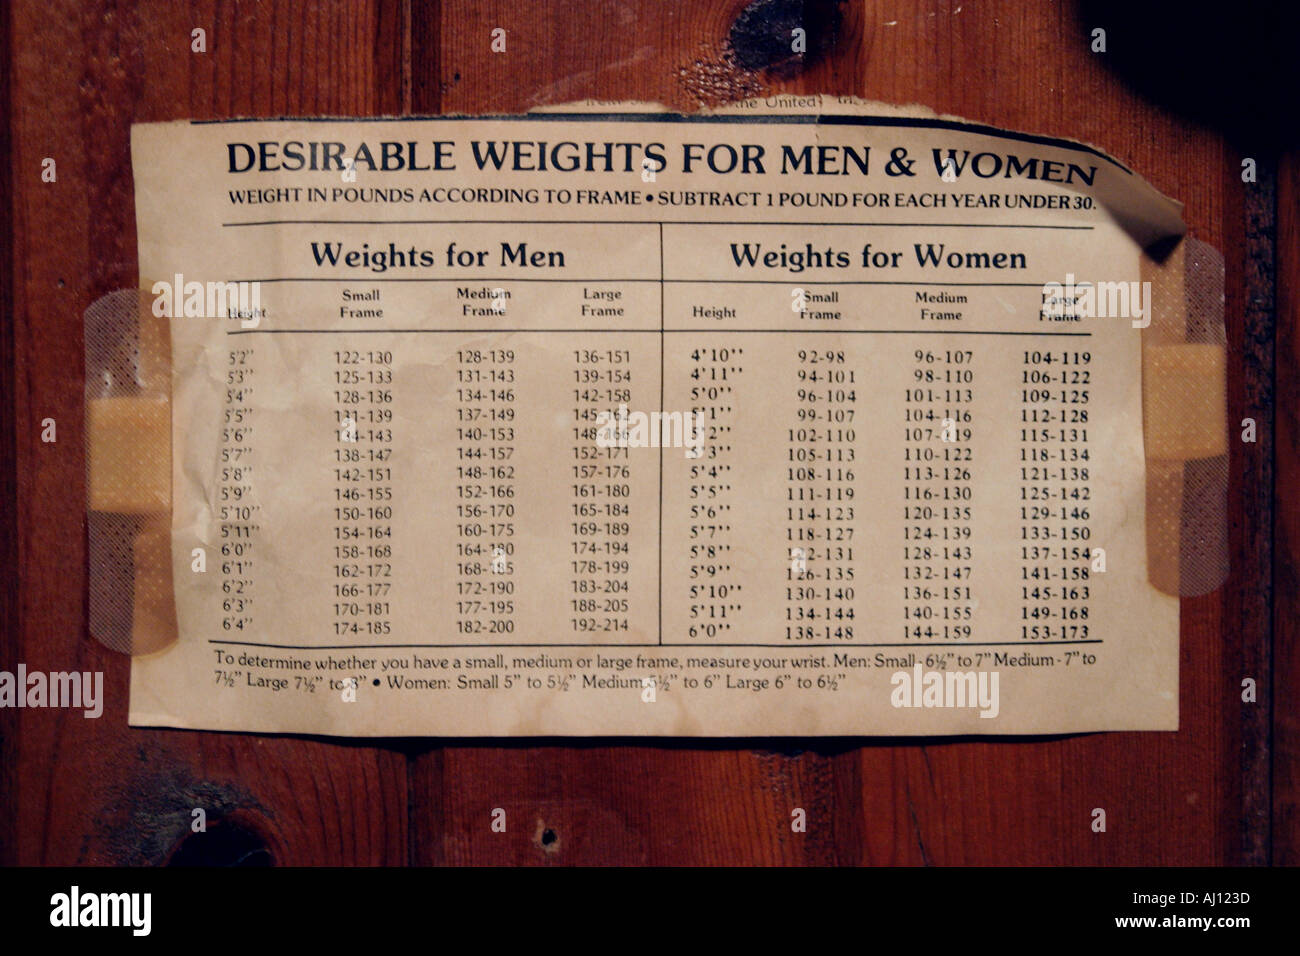 Weight Chart For Men In Pounds